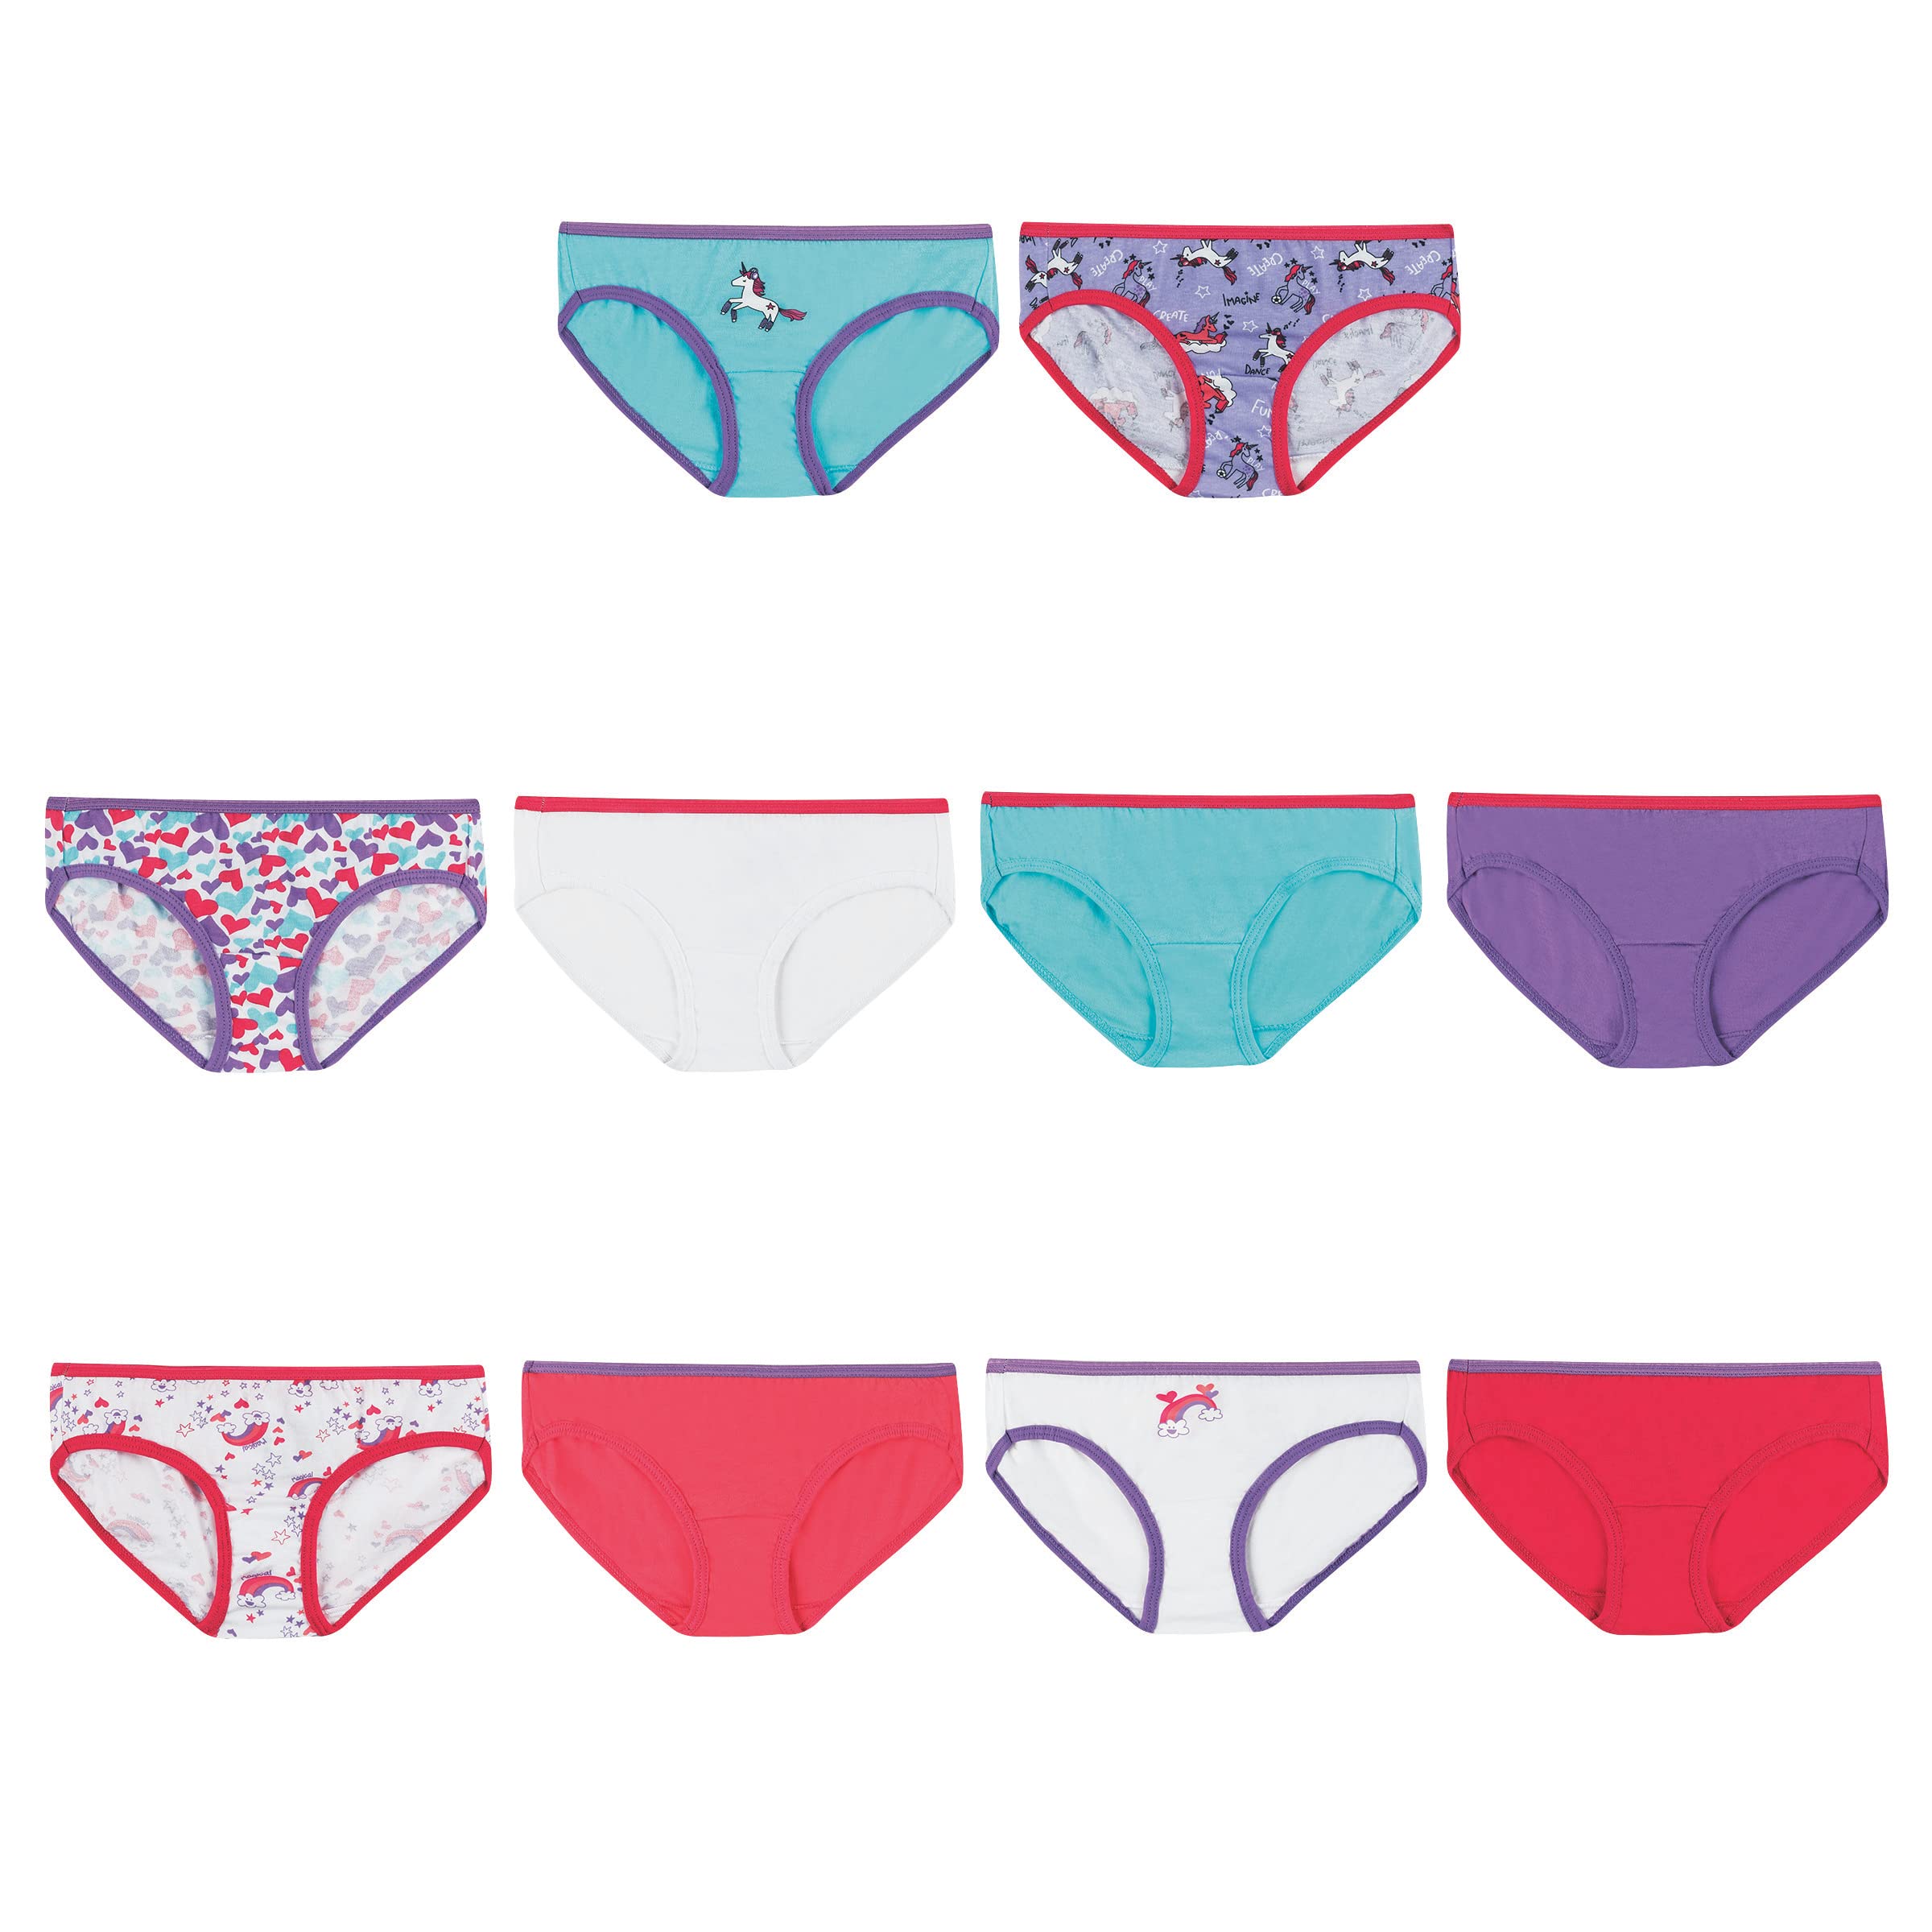 Buy Hanes Girls and Toddler Underwear, Cotton Knit Tagless Brief, Hipster,  and Bikini Panties, Multipack (Colors May Vary)